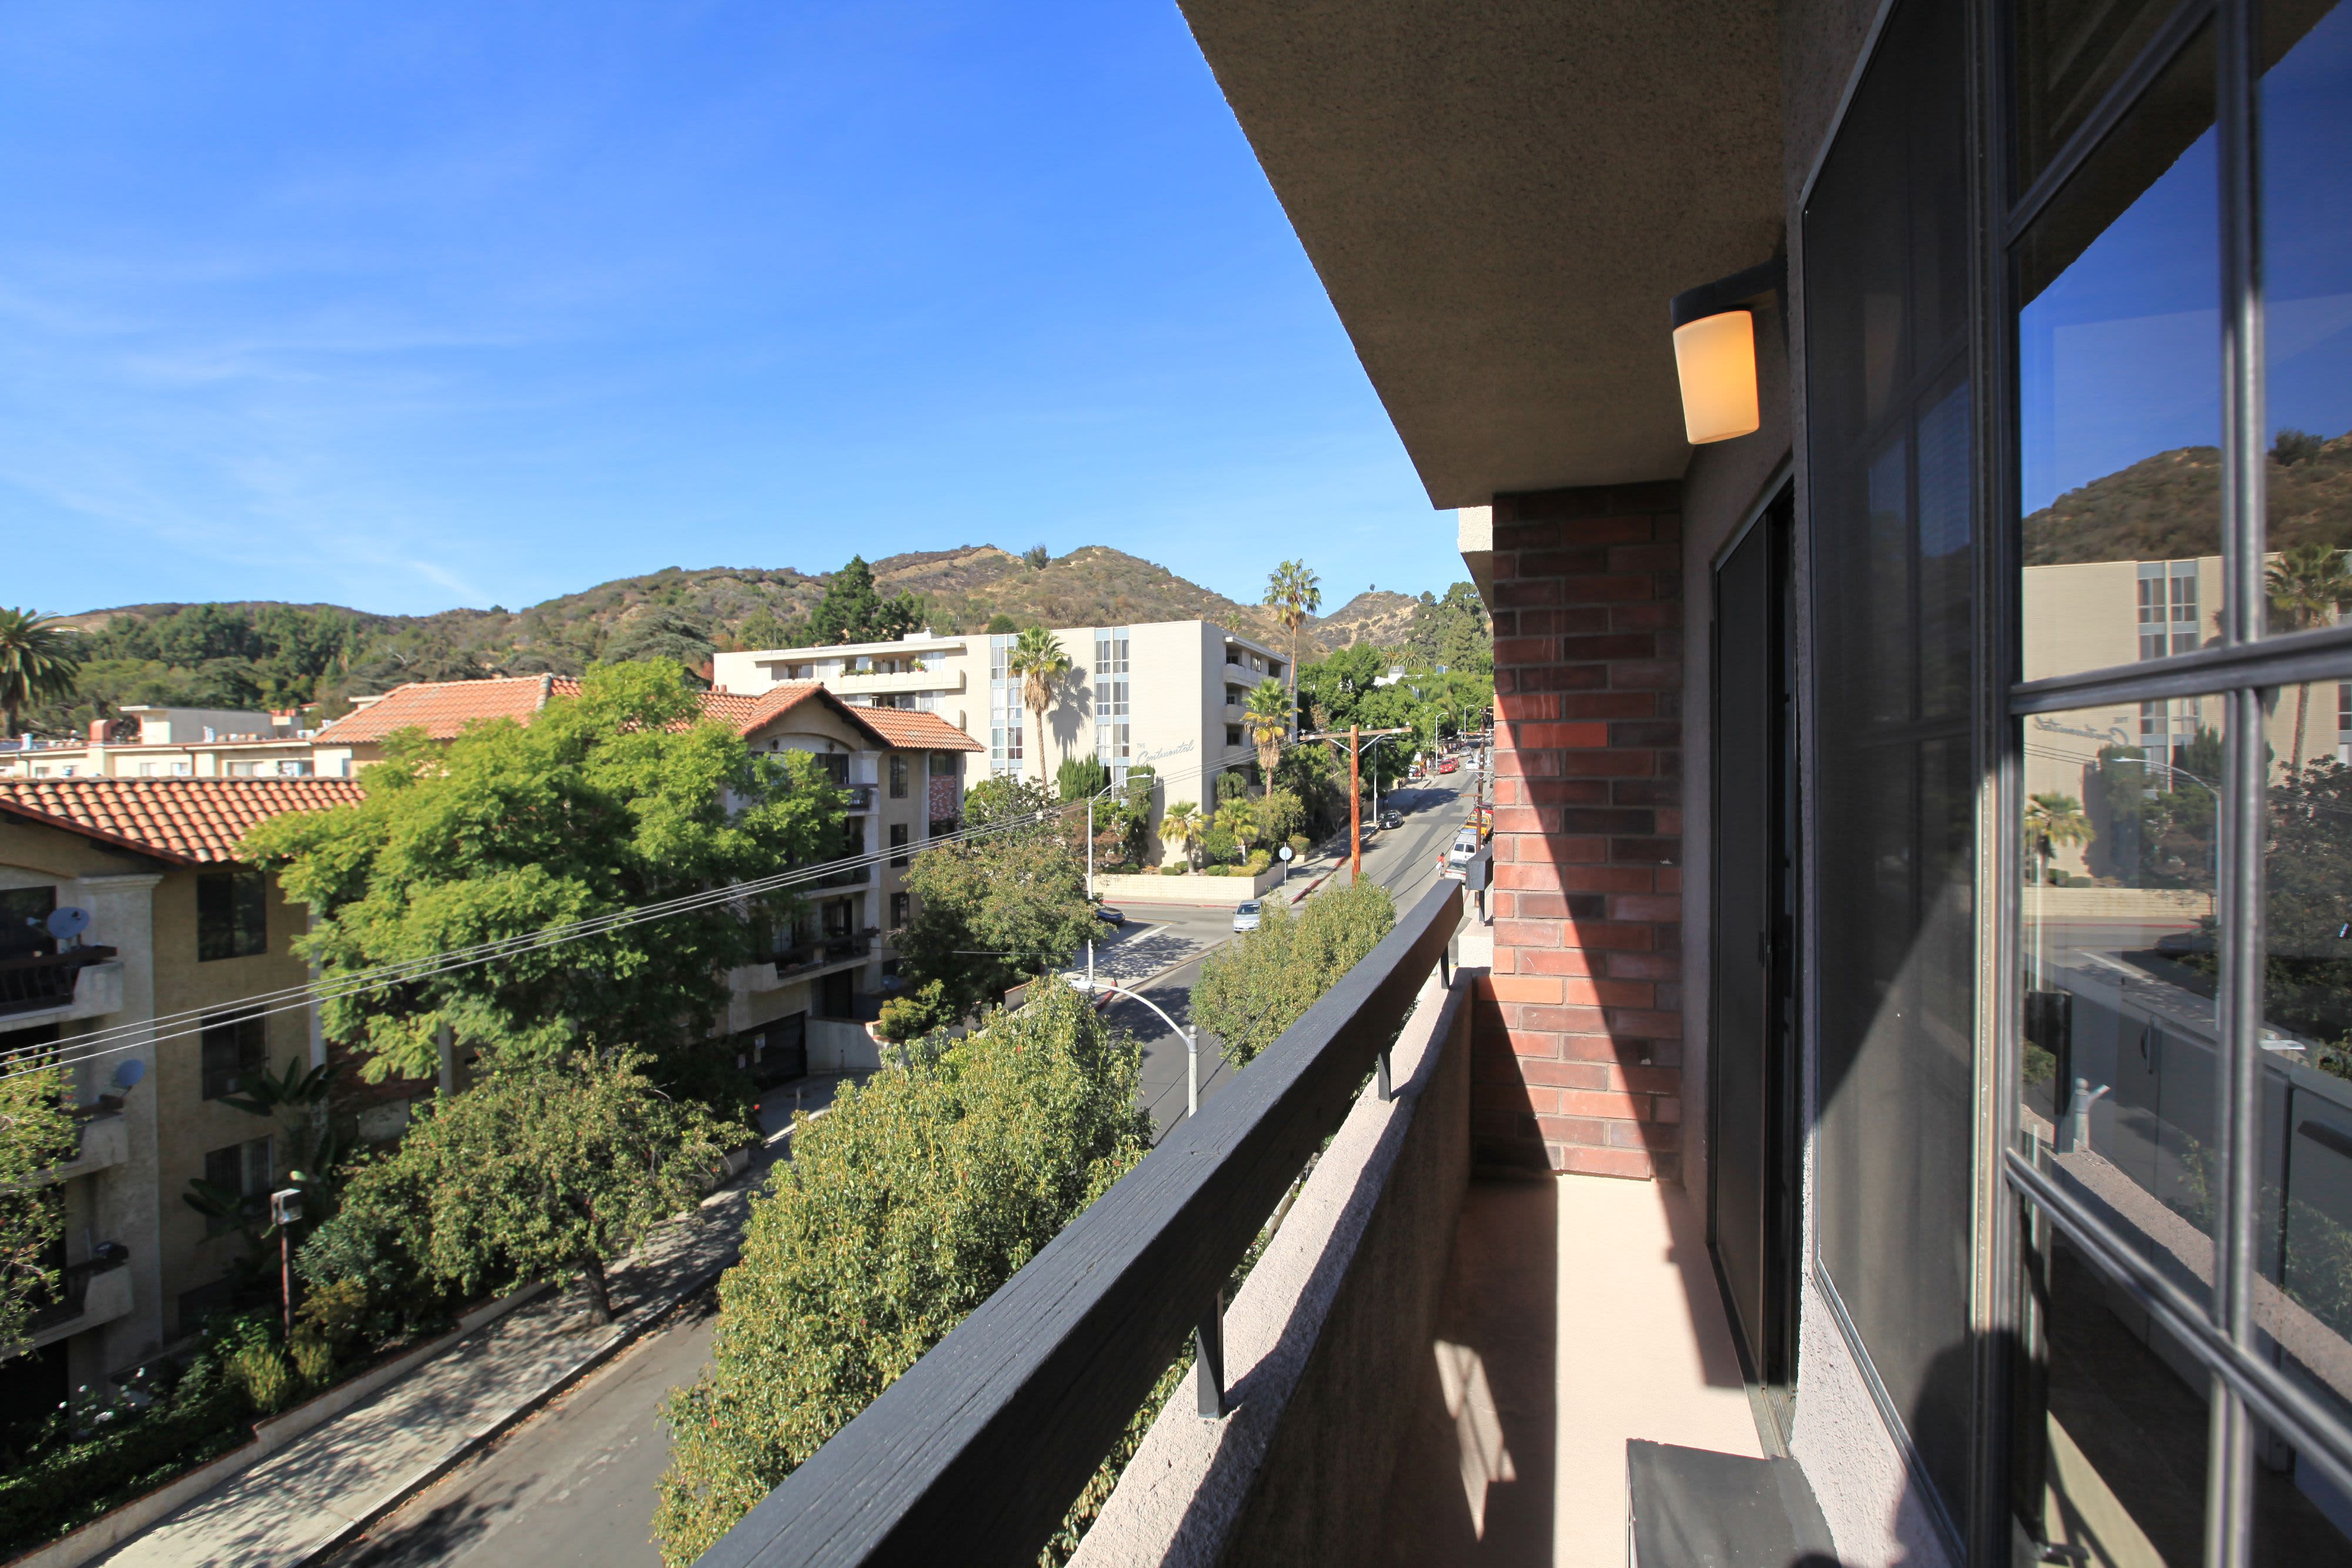 Gorgeous view from the balcony at Savoy West Apartments in Los Angeles, California